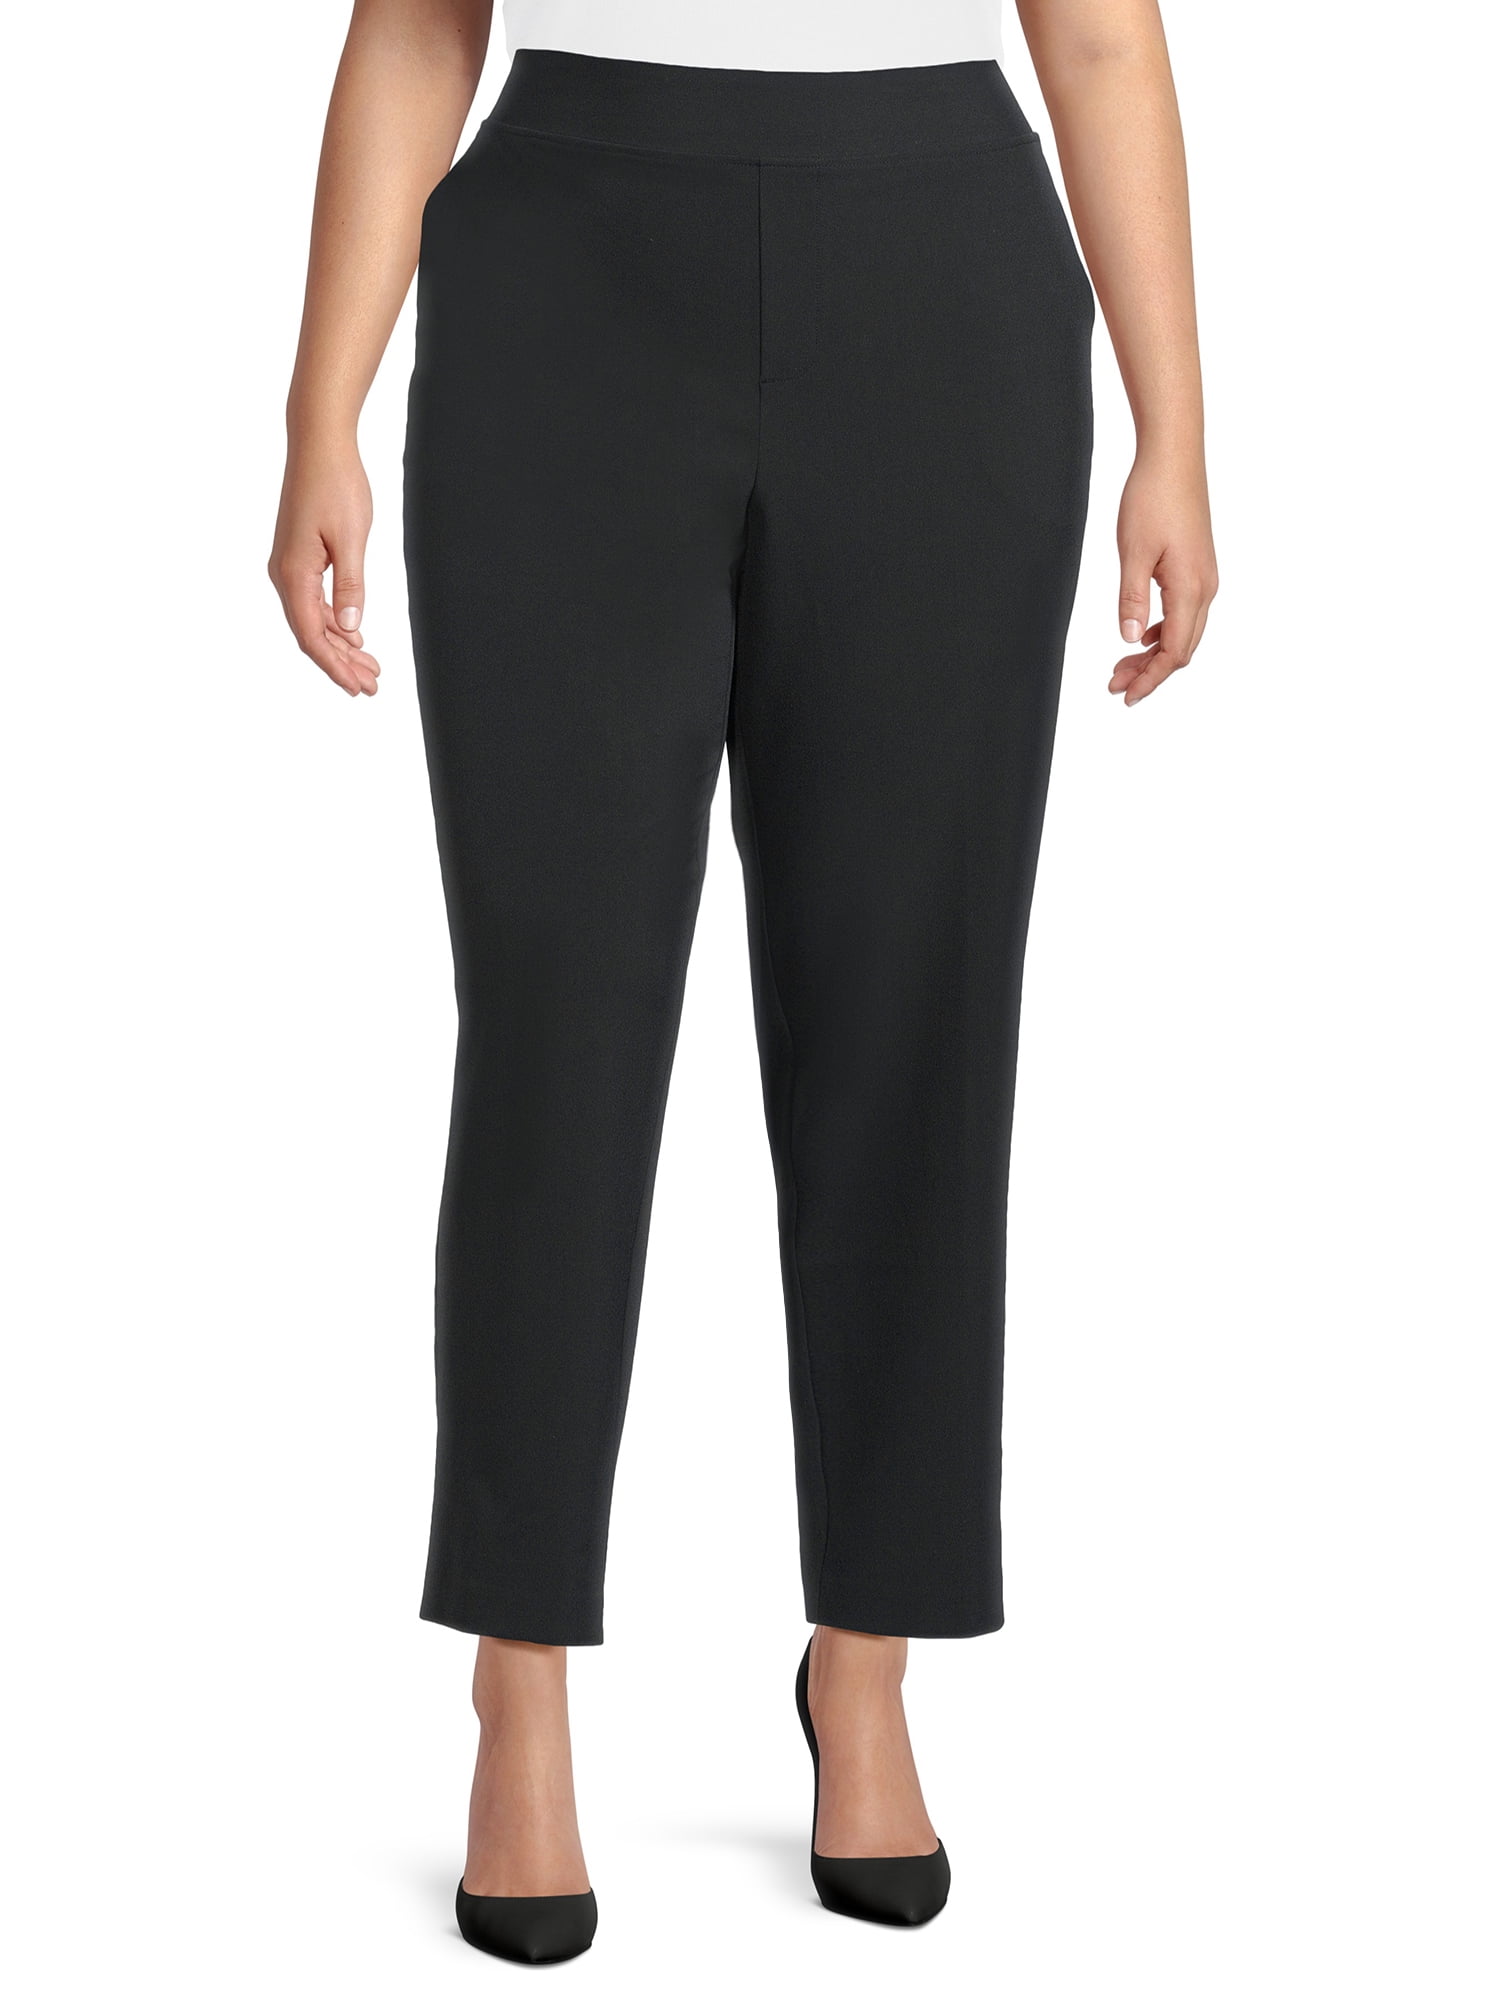 Just My Size Women's Plus Size Tummy Control Pull-On Dress Pants ...